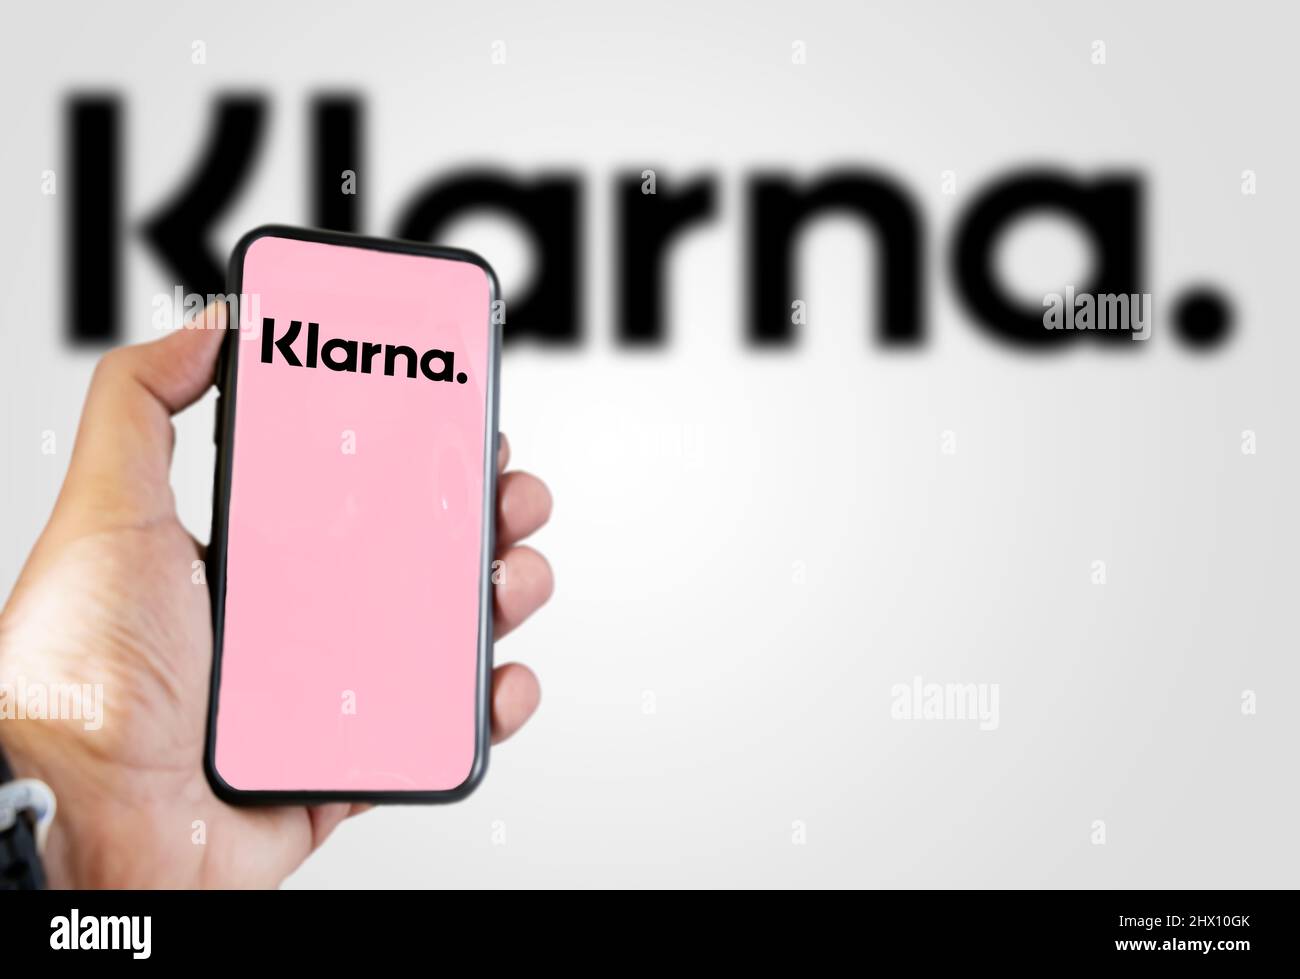 Rome, Italy, February 2022: Hand holding a device with the Klarna mobile app on the screen. Klarna is the largest private fin-tech start-up in Europe. Stock Photo